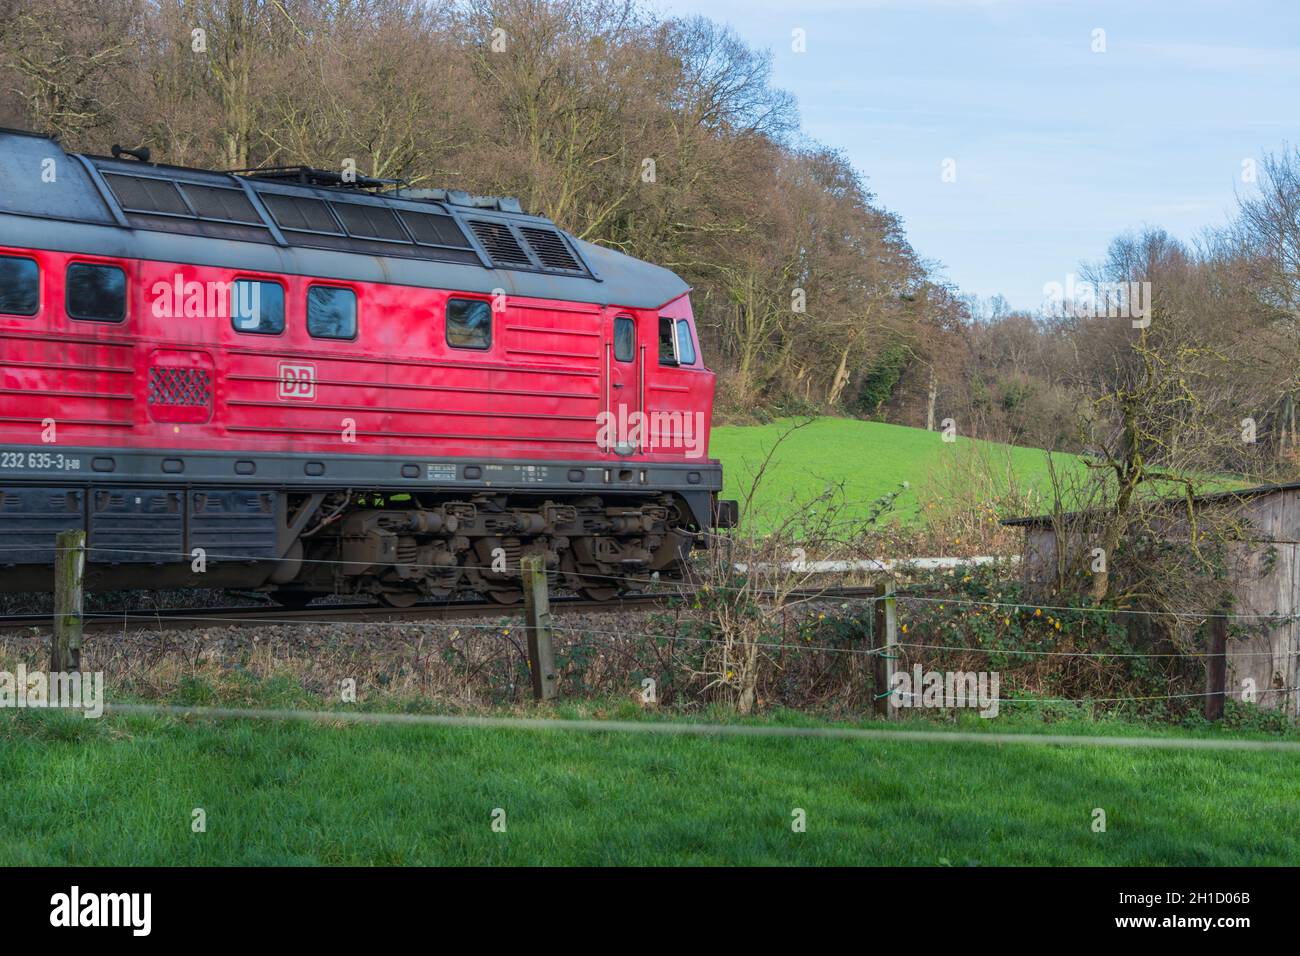 RATINGEN, NRW, GERMANY - DECEMBER 28, 2015: Locomotive at the railroad crossing in Ratingen at the moated castle 'house to house'. By propelled fast t Stock Photo